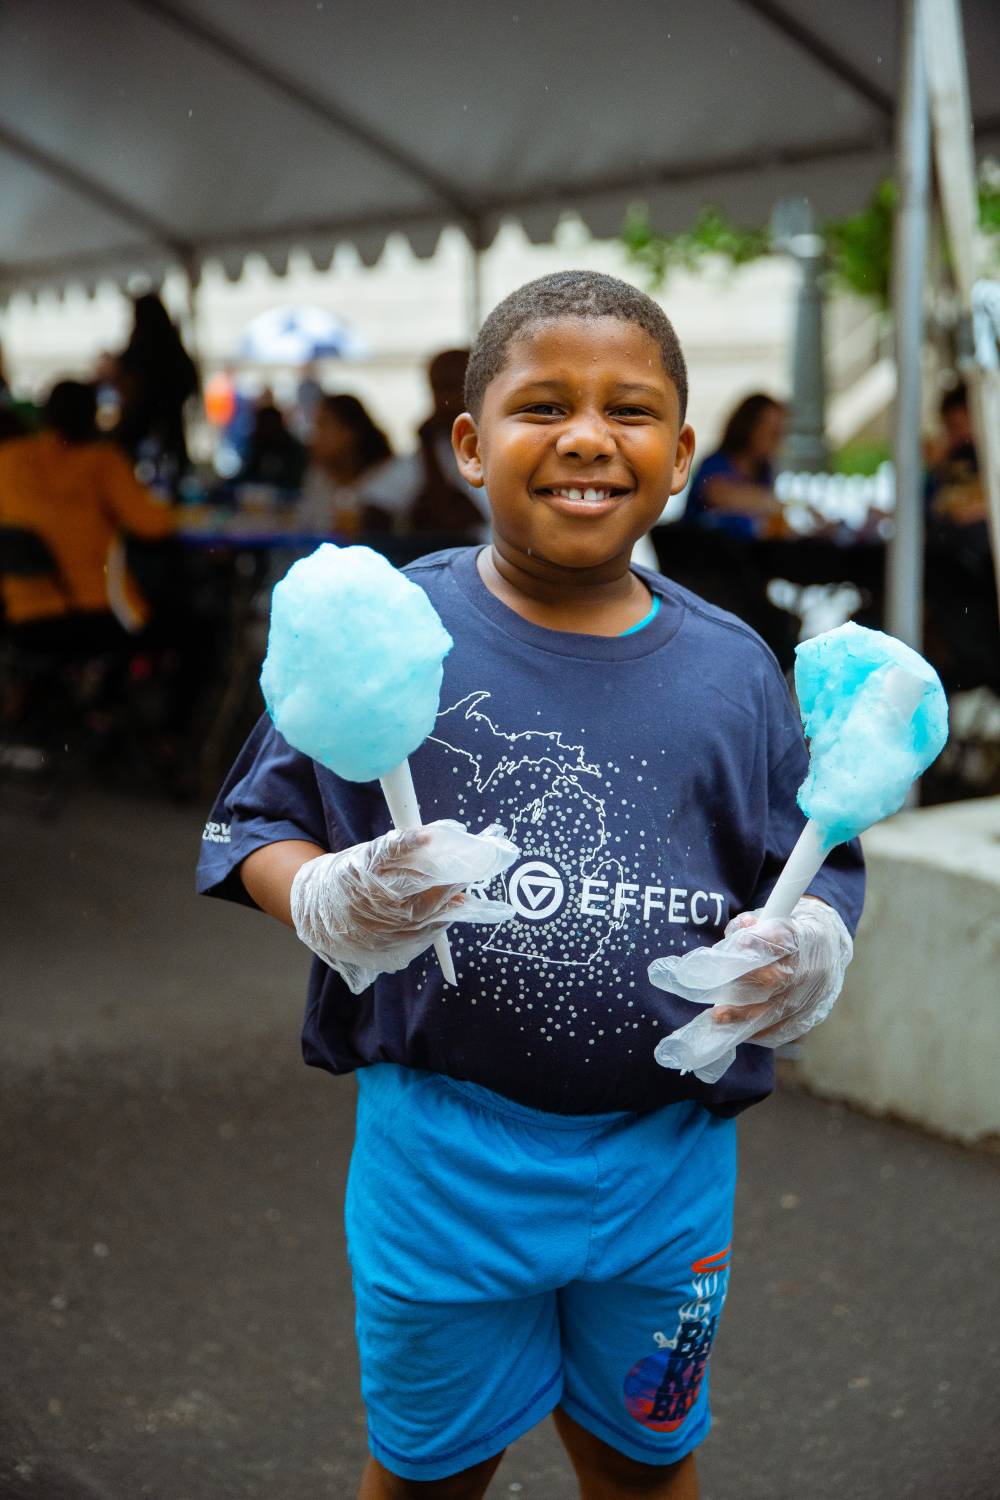 A cute kid in a gvsu laker effect T-shirt is helping serve cotton candy to the people at the party